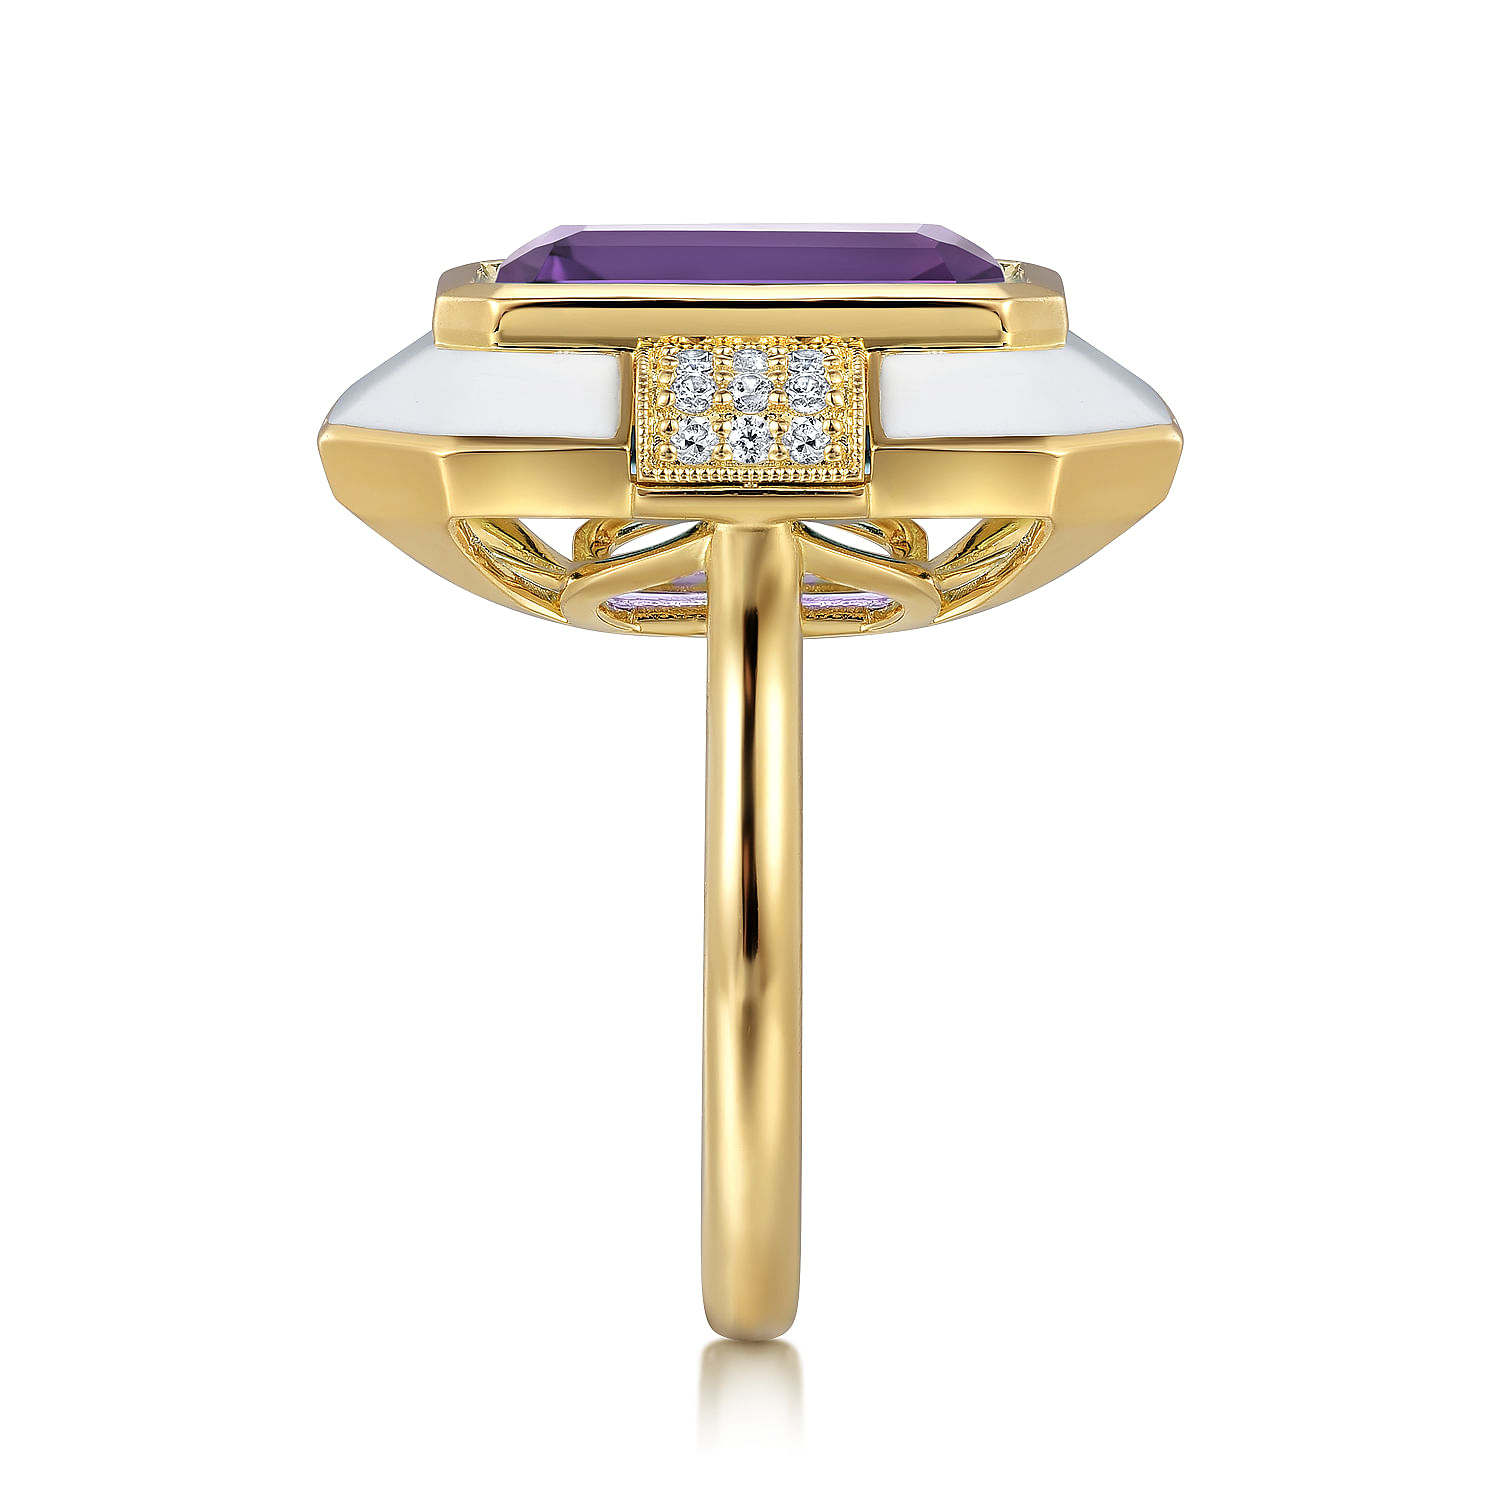 14K Yellow Gold Diamond and Emerald Cut Amethyst Fashion Ring With White Enamel